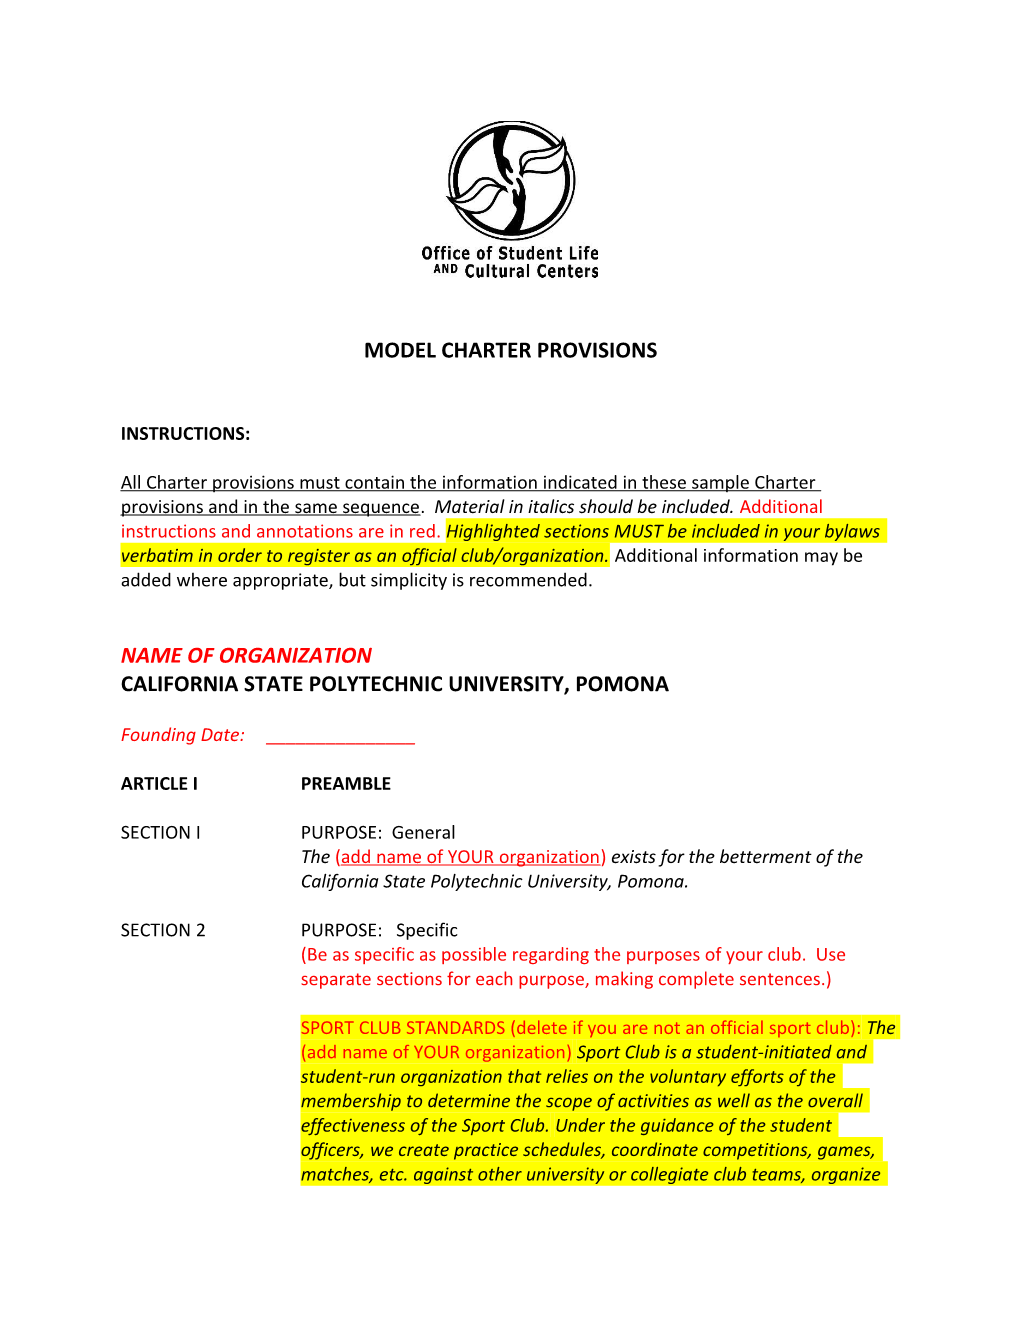 Model Charter Provisions